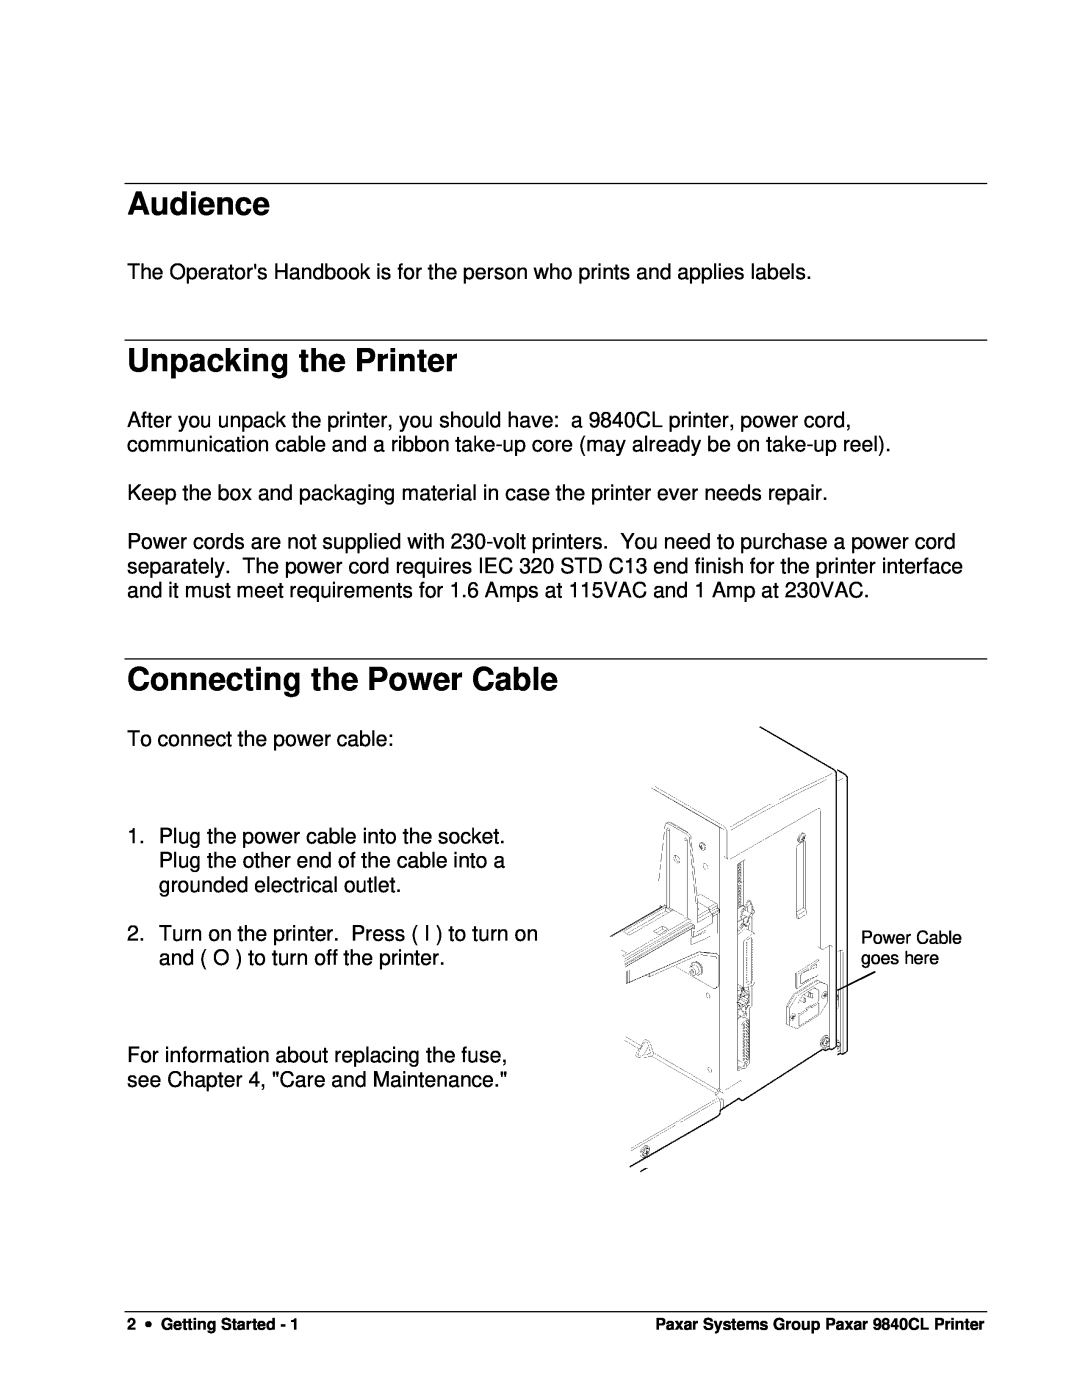 Paxar 9840CL user manual Audience, Unpacking the Printer, Connecting the Power Cable 